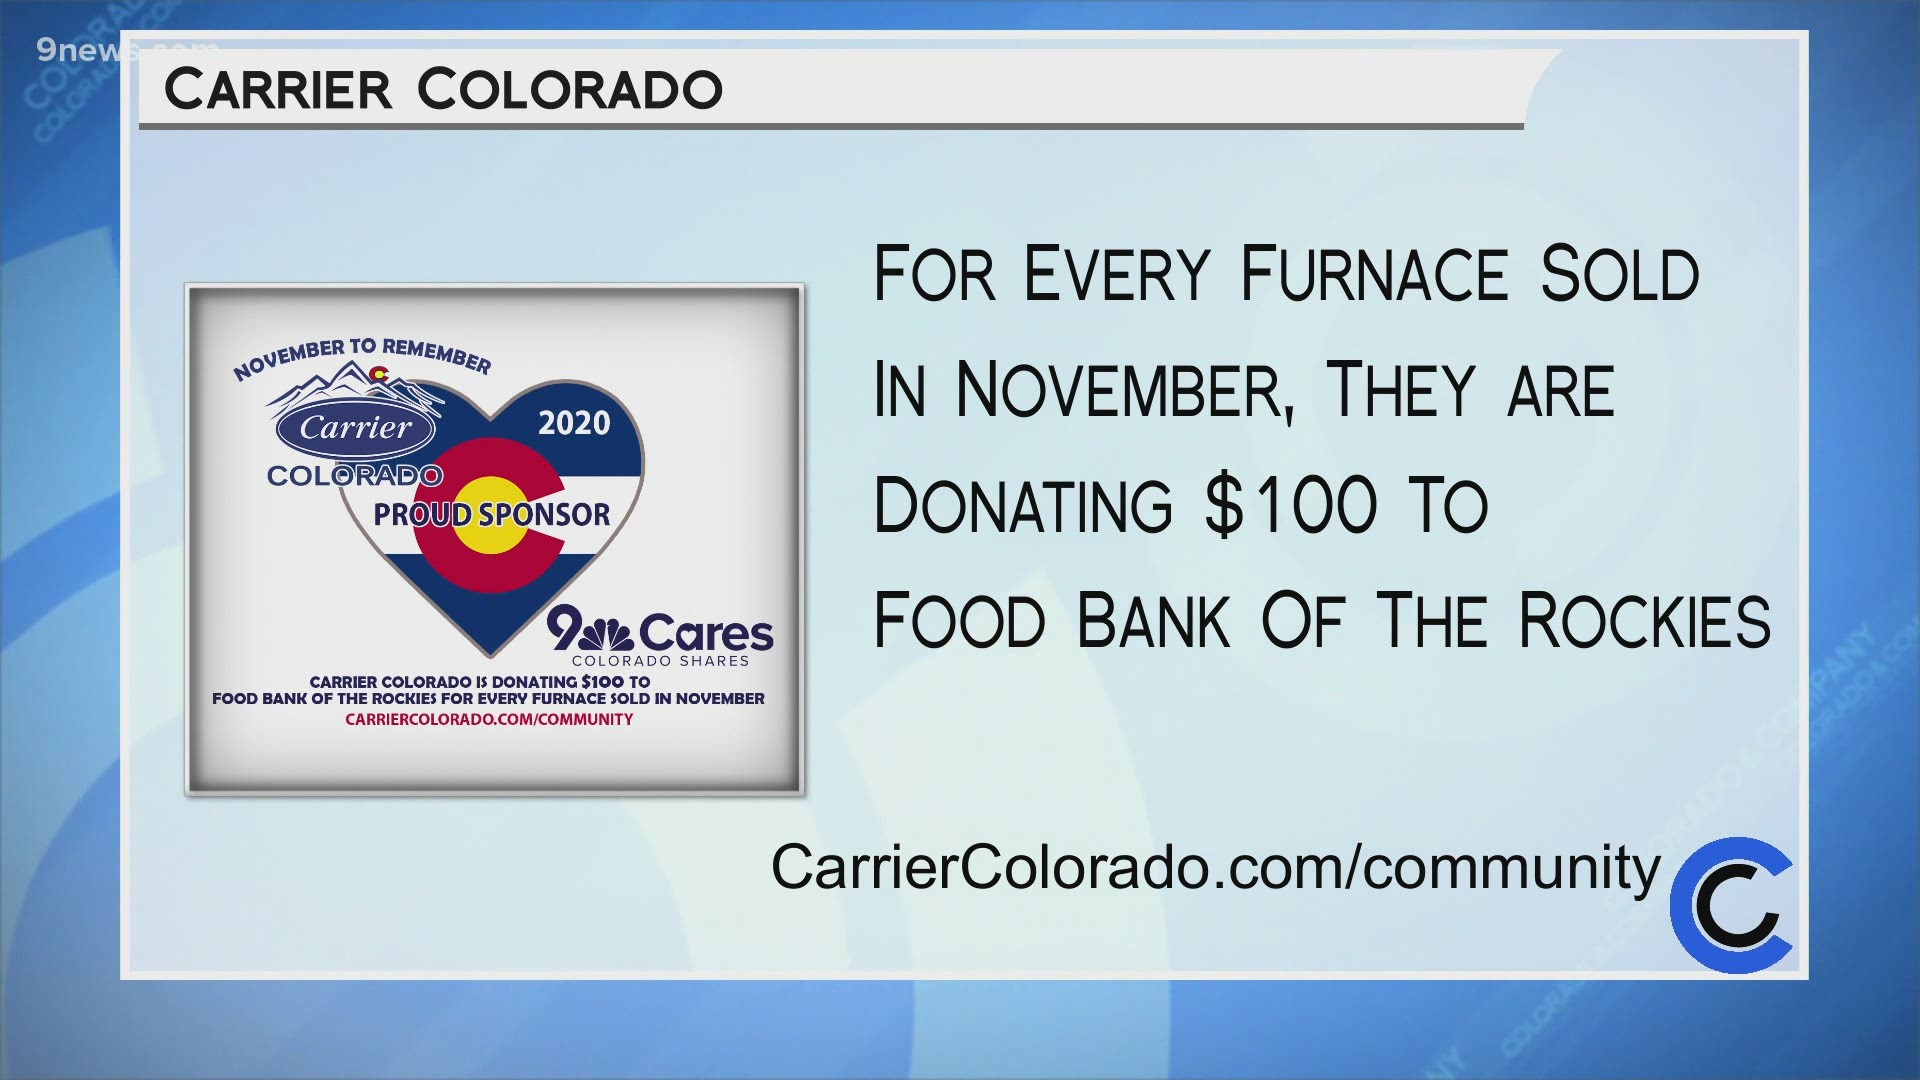 Carrier Colorado is a proud sponsor of 9Cares Colorado Shares virtual food drive. Learn more about how they help the community at CarrierColorado.com/Community.